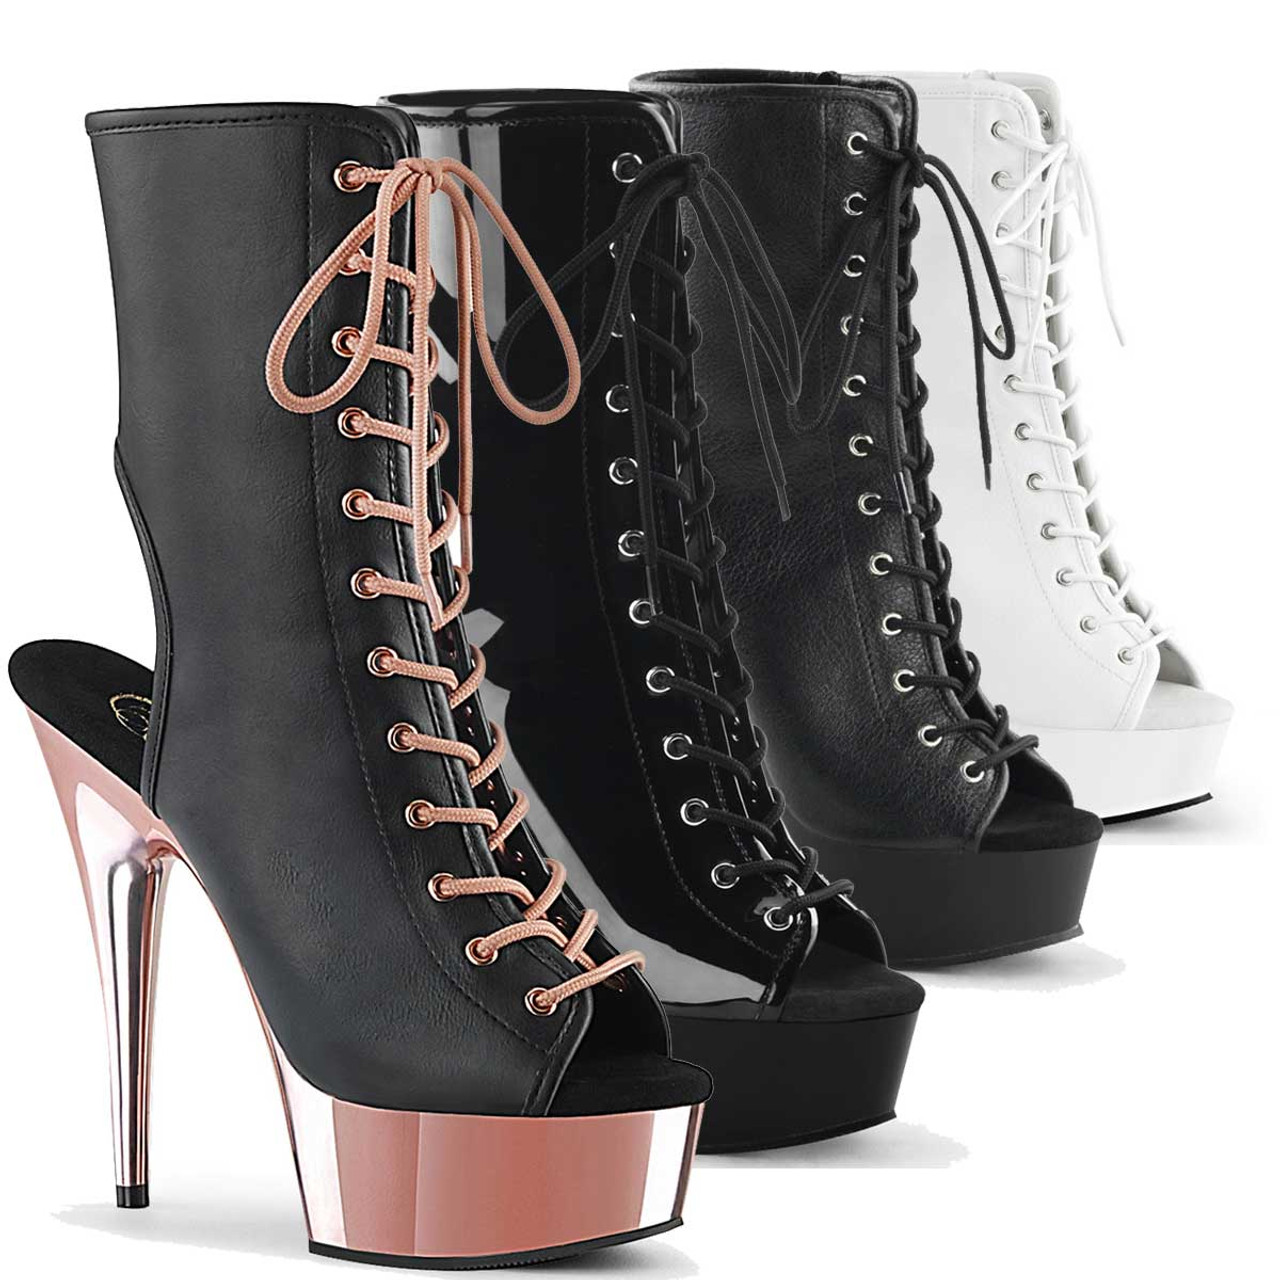 6 inch ankle boots